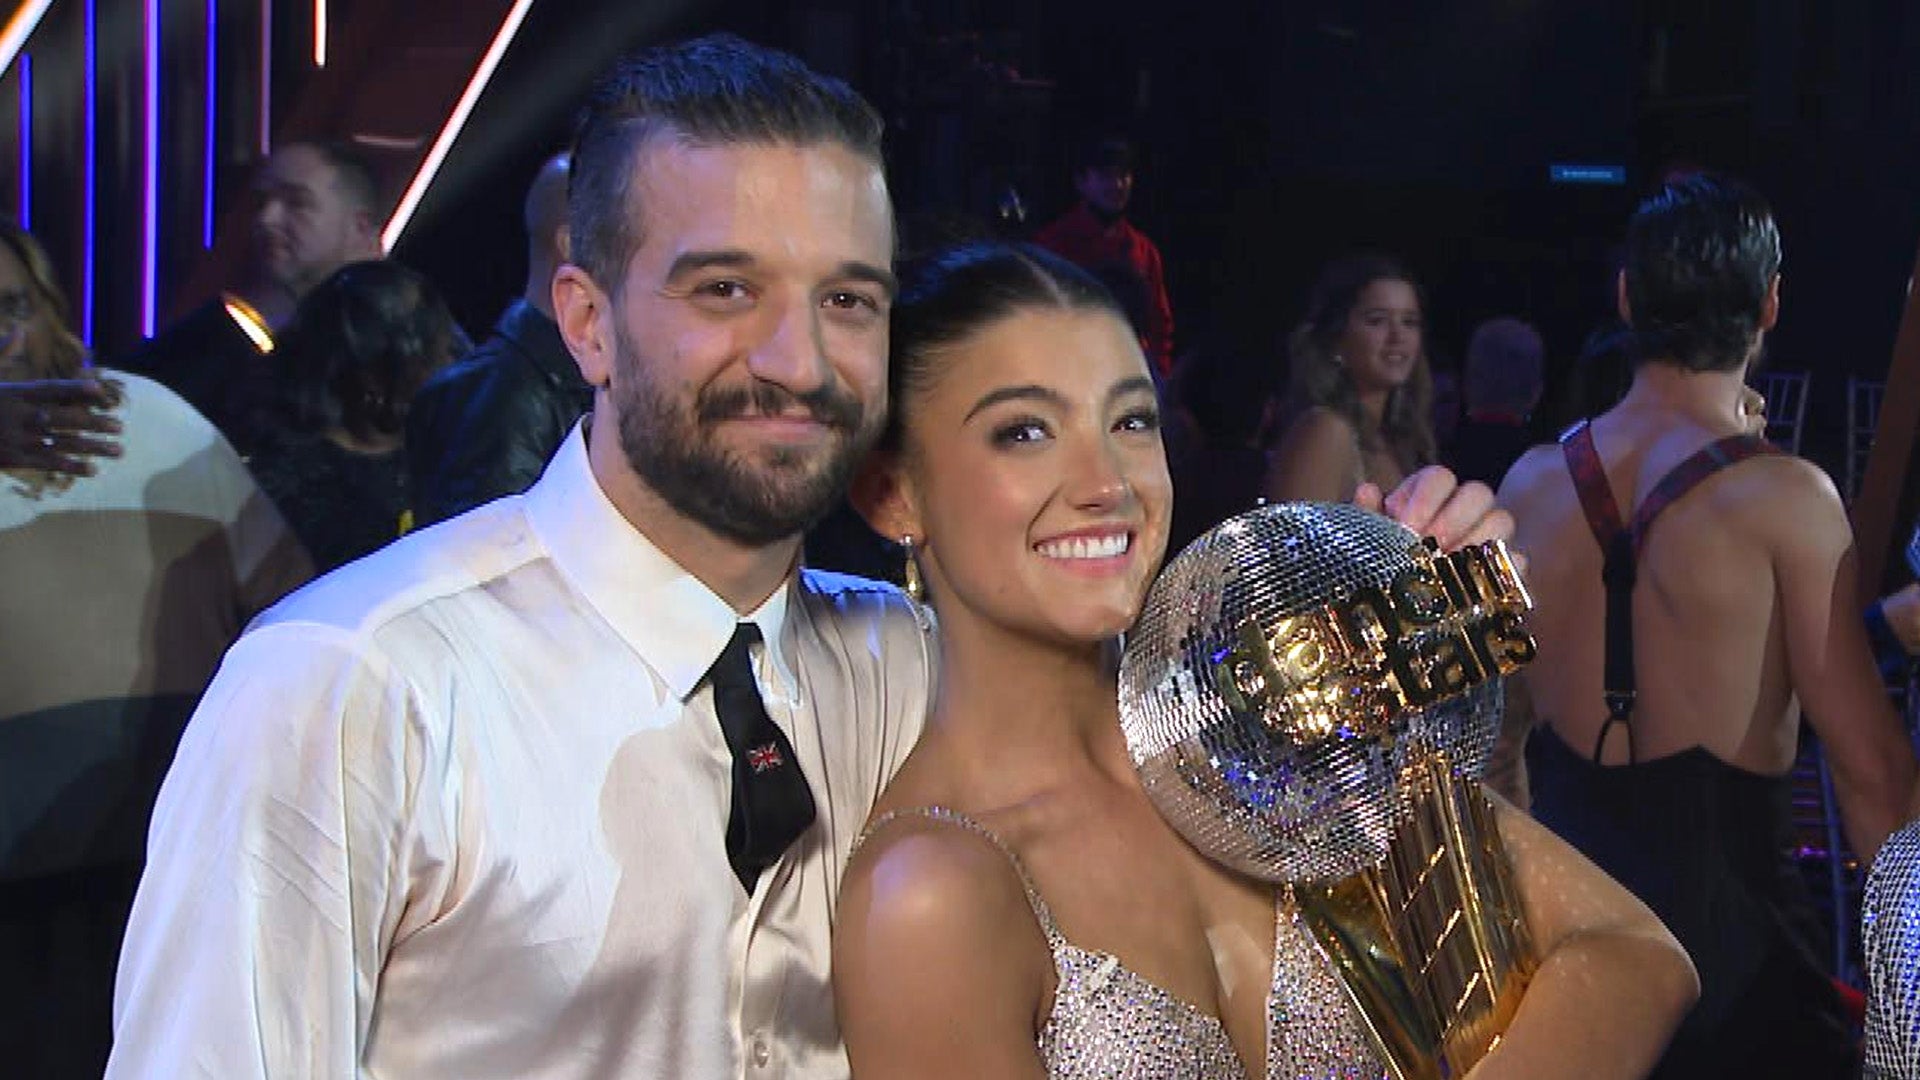 ‘Dancing With the Stars’: Charli D’Amelio and Mark Ballas Shocked Over Season 31 Win (Exclusive)